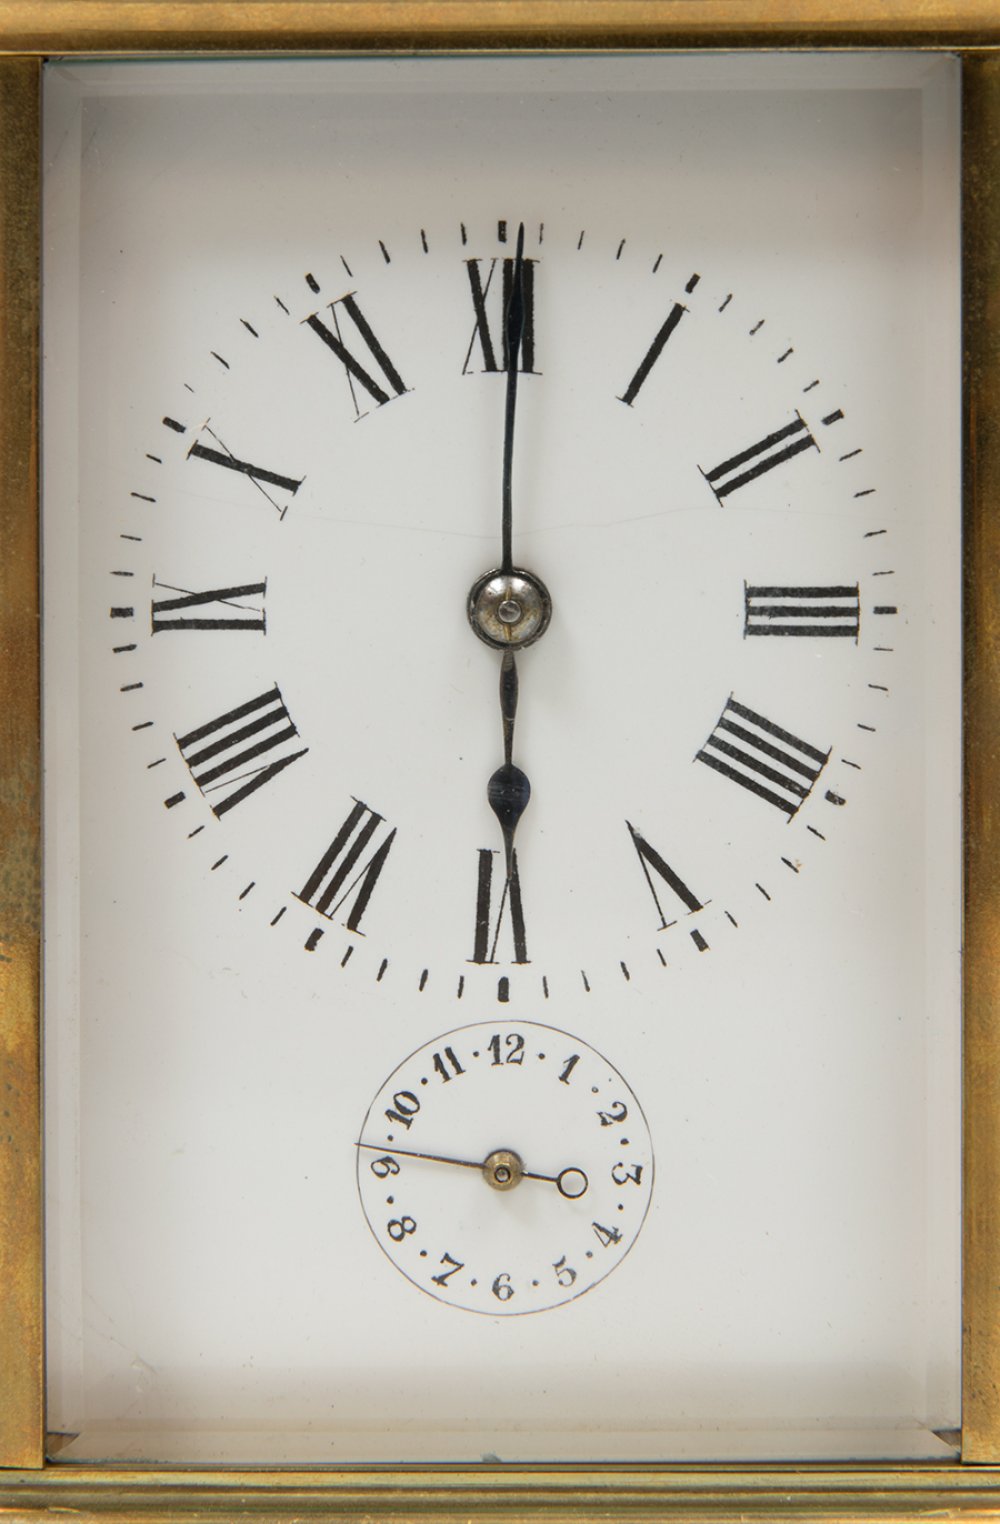 Travel clock; late 19th century.Bronze and bevelled glass.No key preserved.Precise set-up. - Image 6 of 6